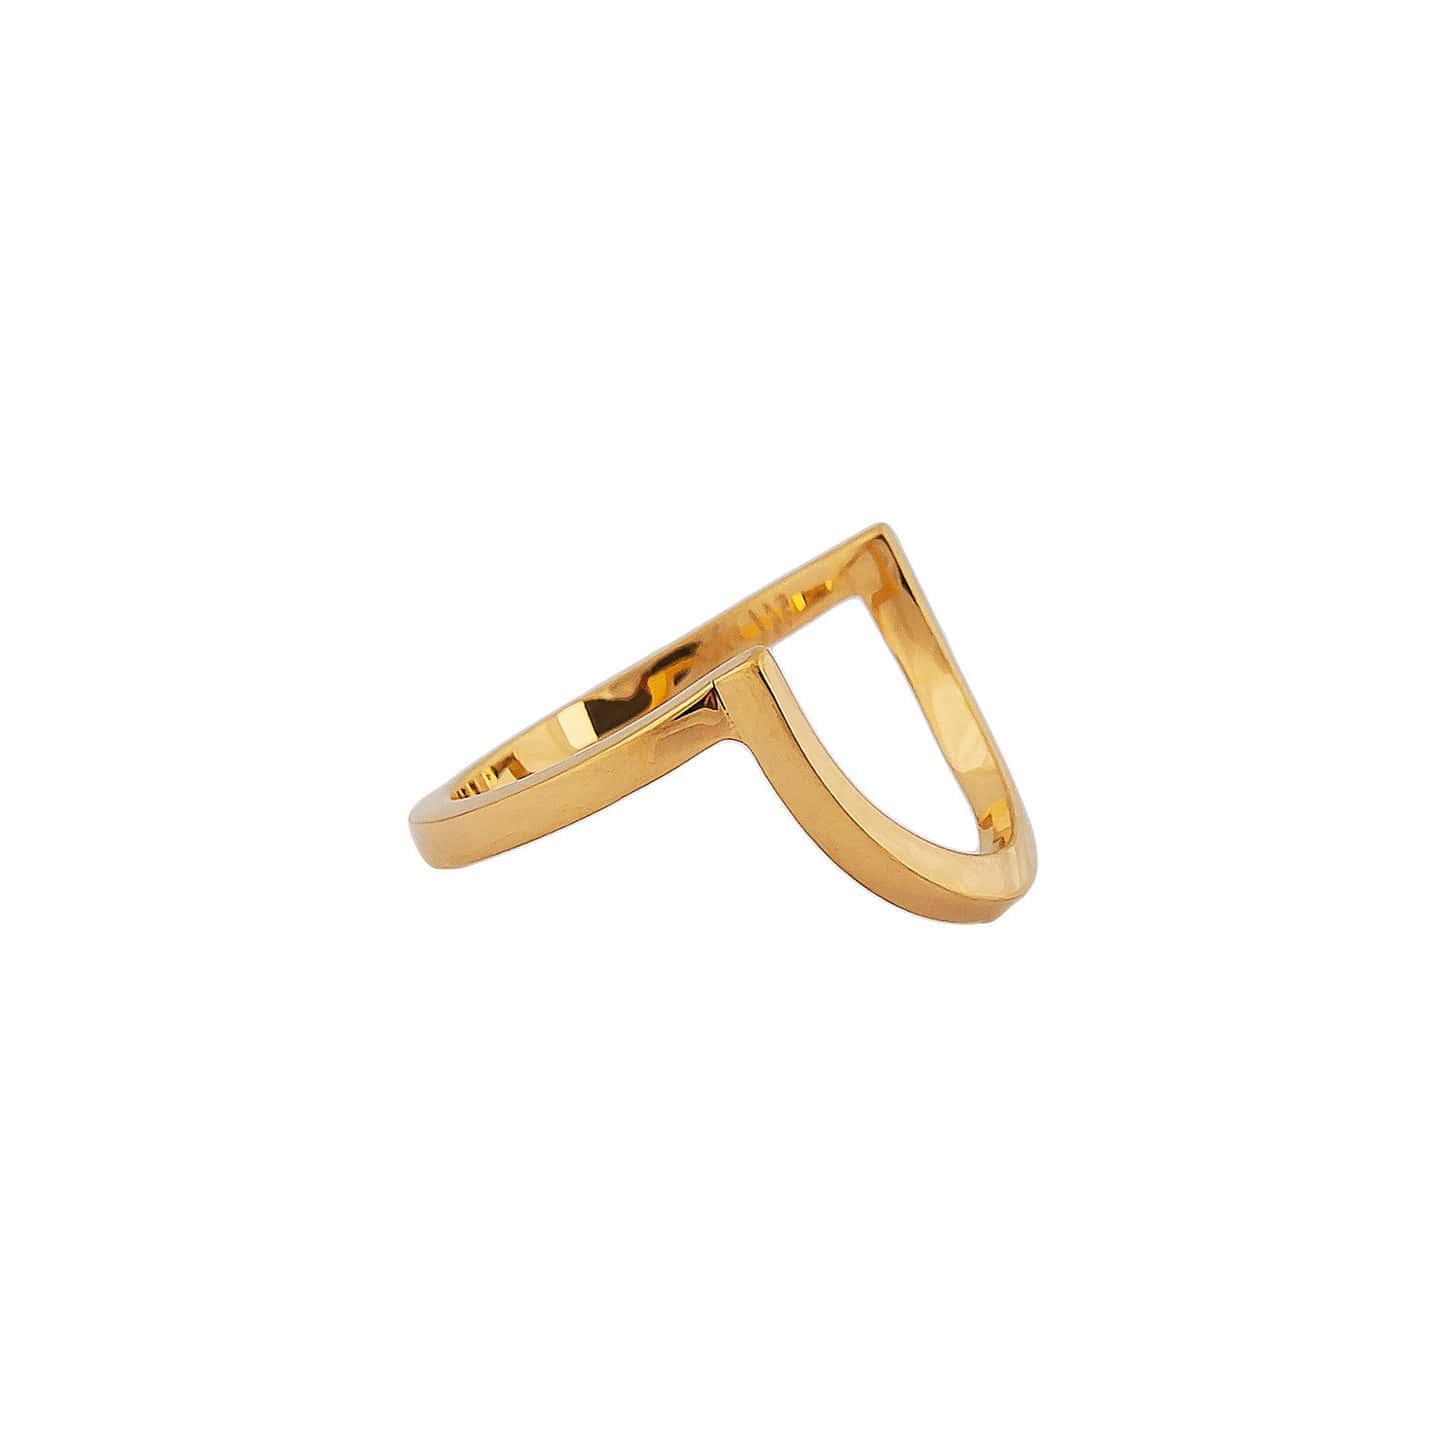 Sharp gold plated silver ring, side view.